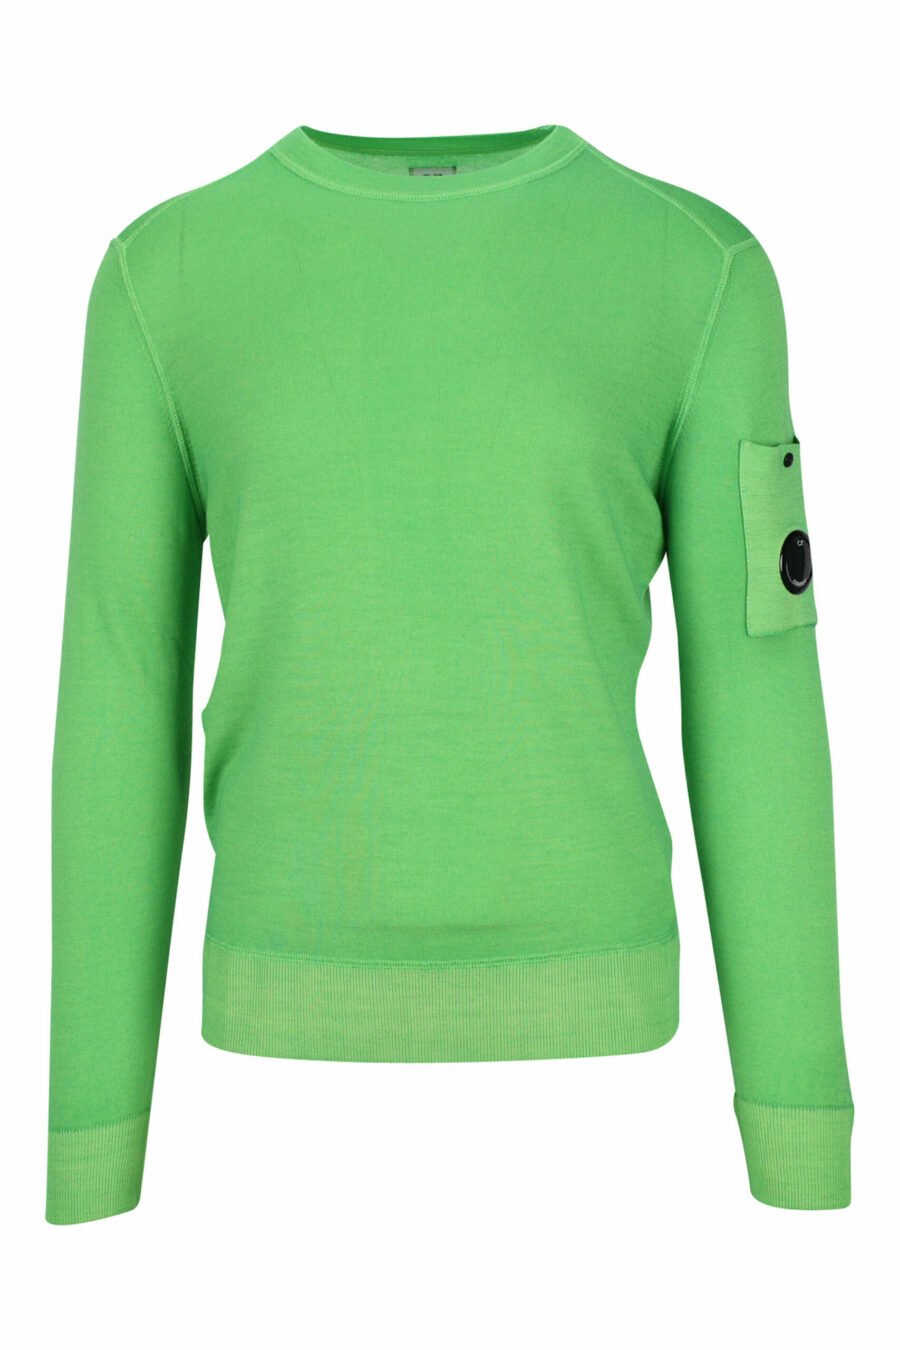 Green sweatshirt with side lens logo - 7620943580846 scaled